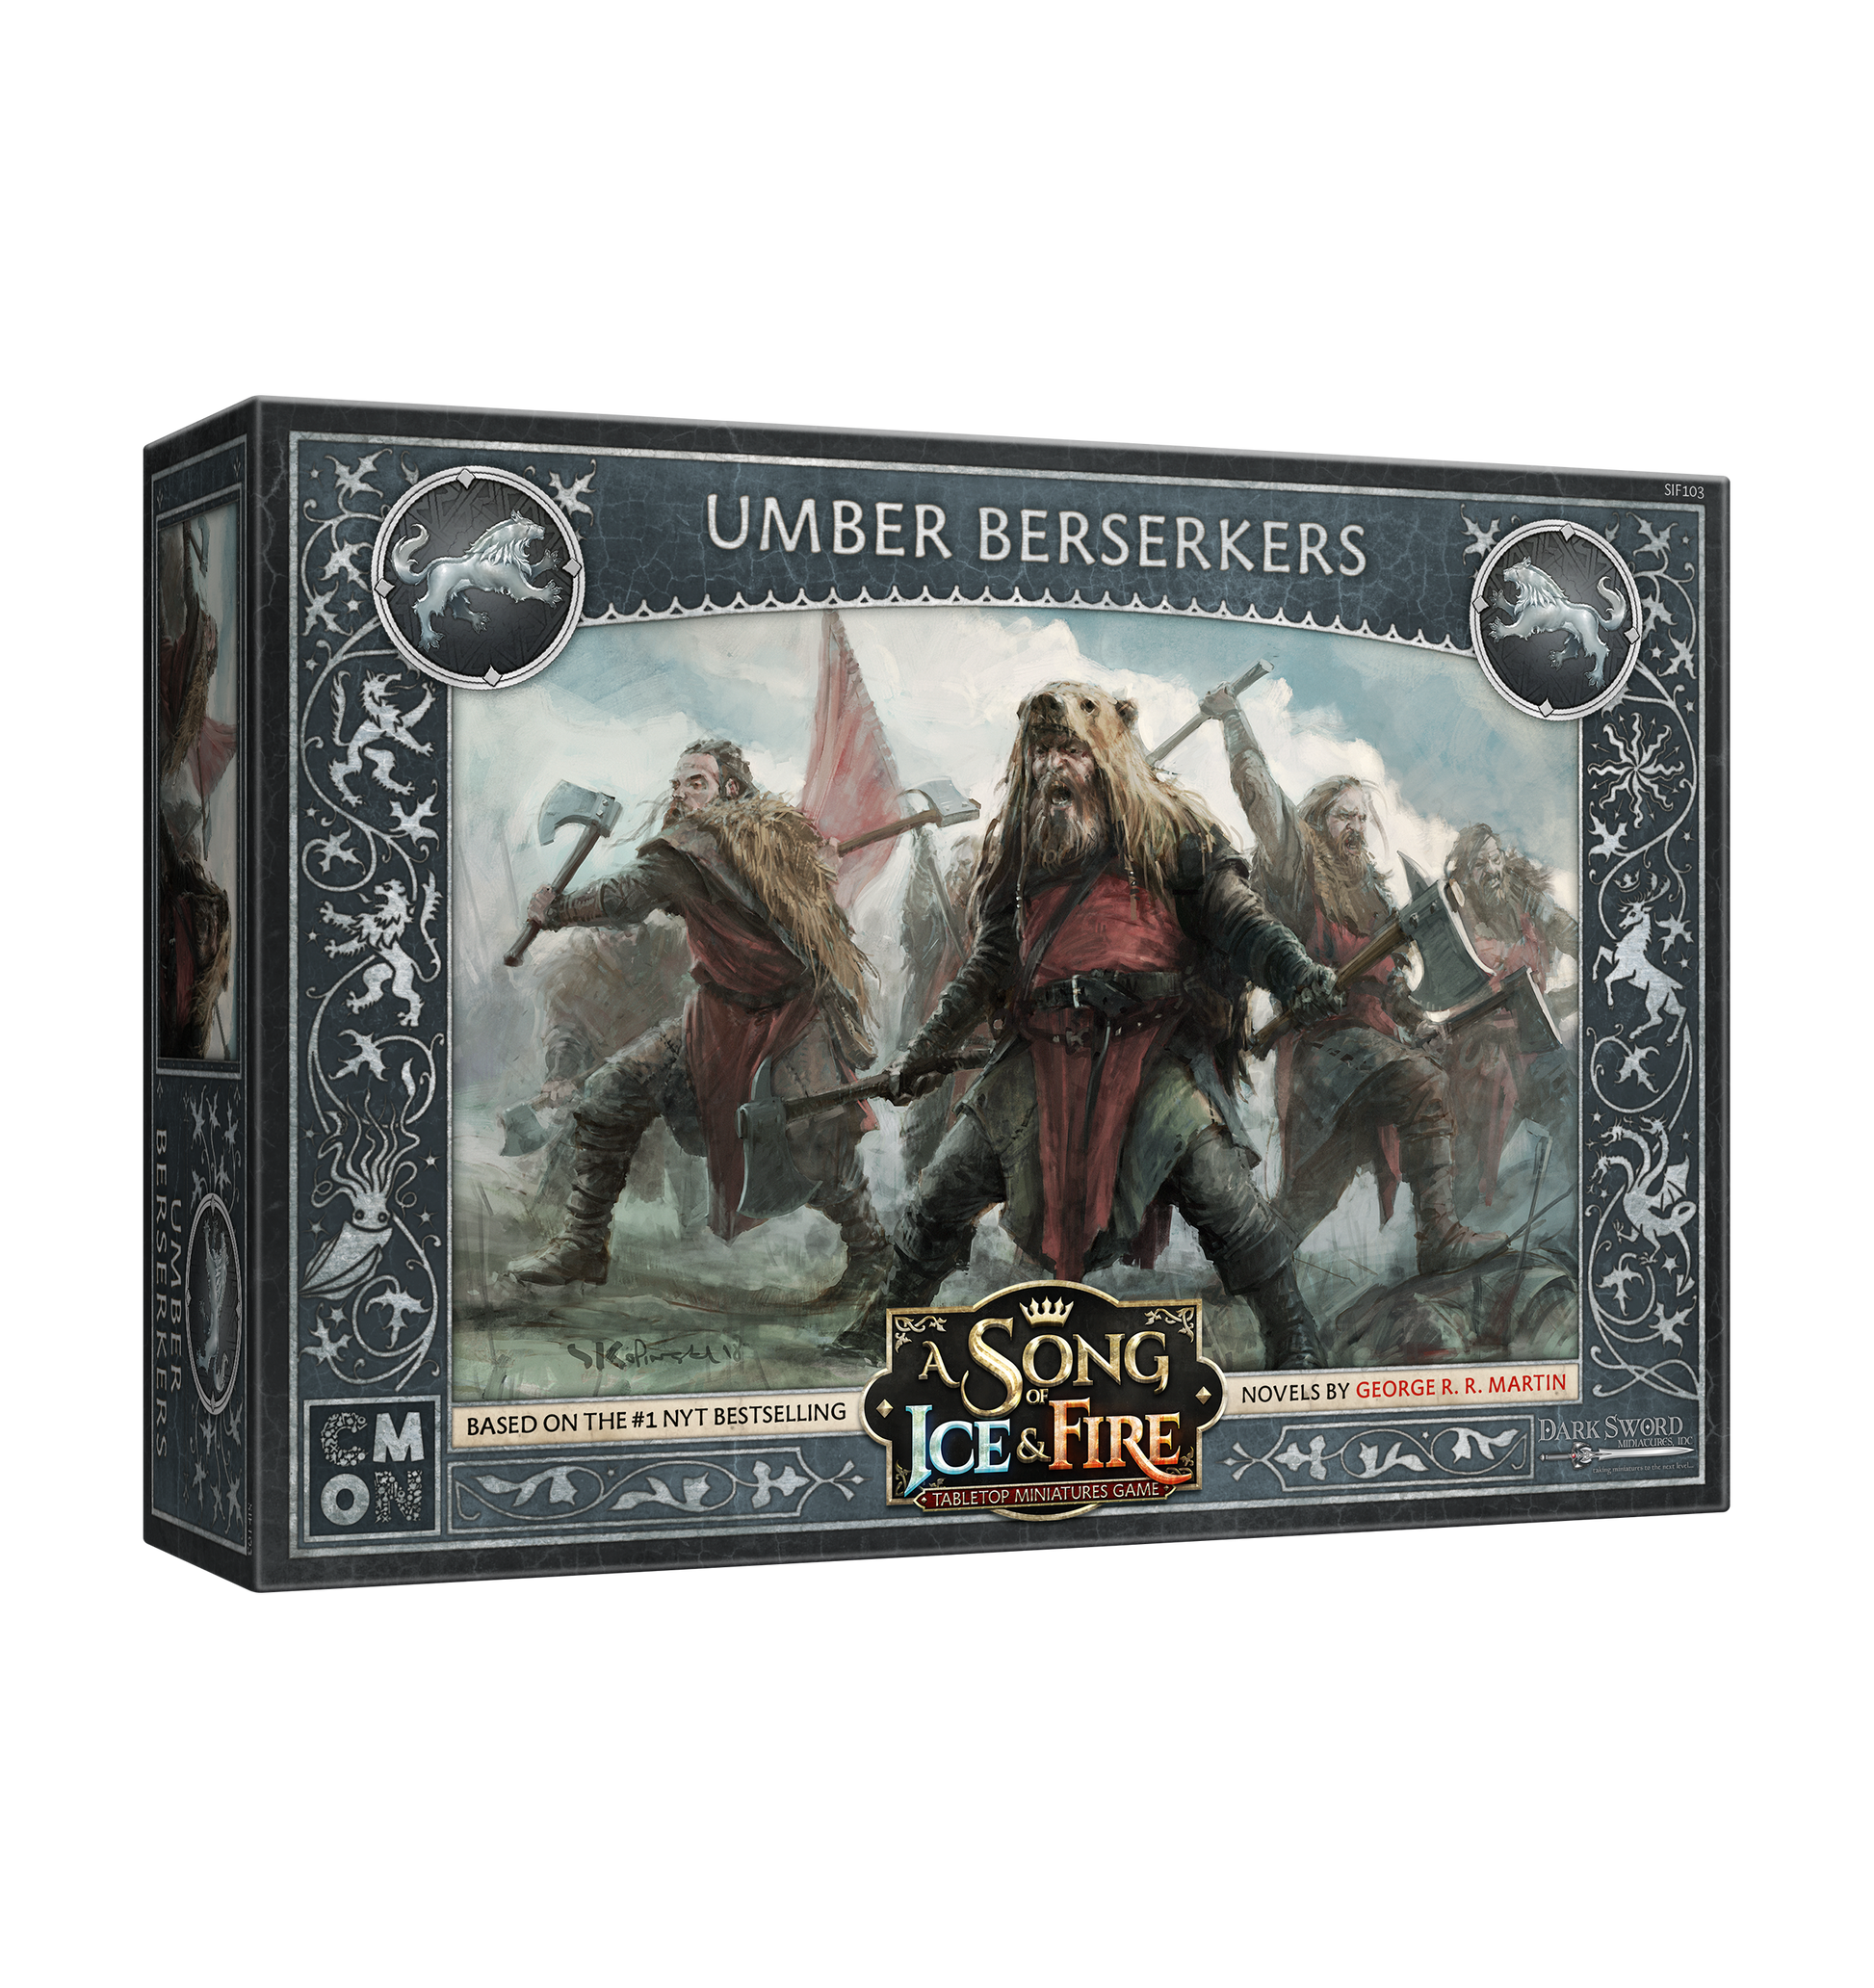 Stark Umber Berserkers A Song Of Ice and Fire